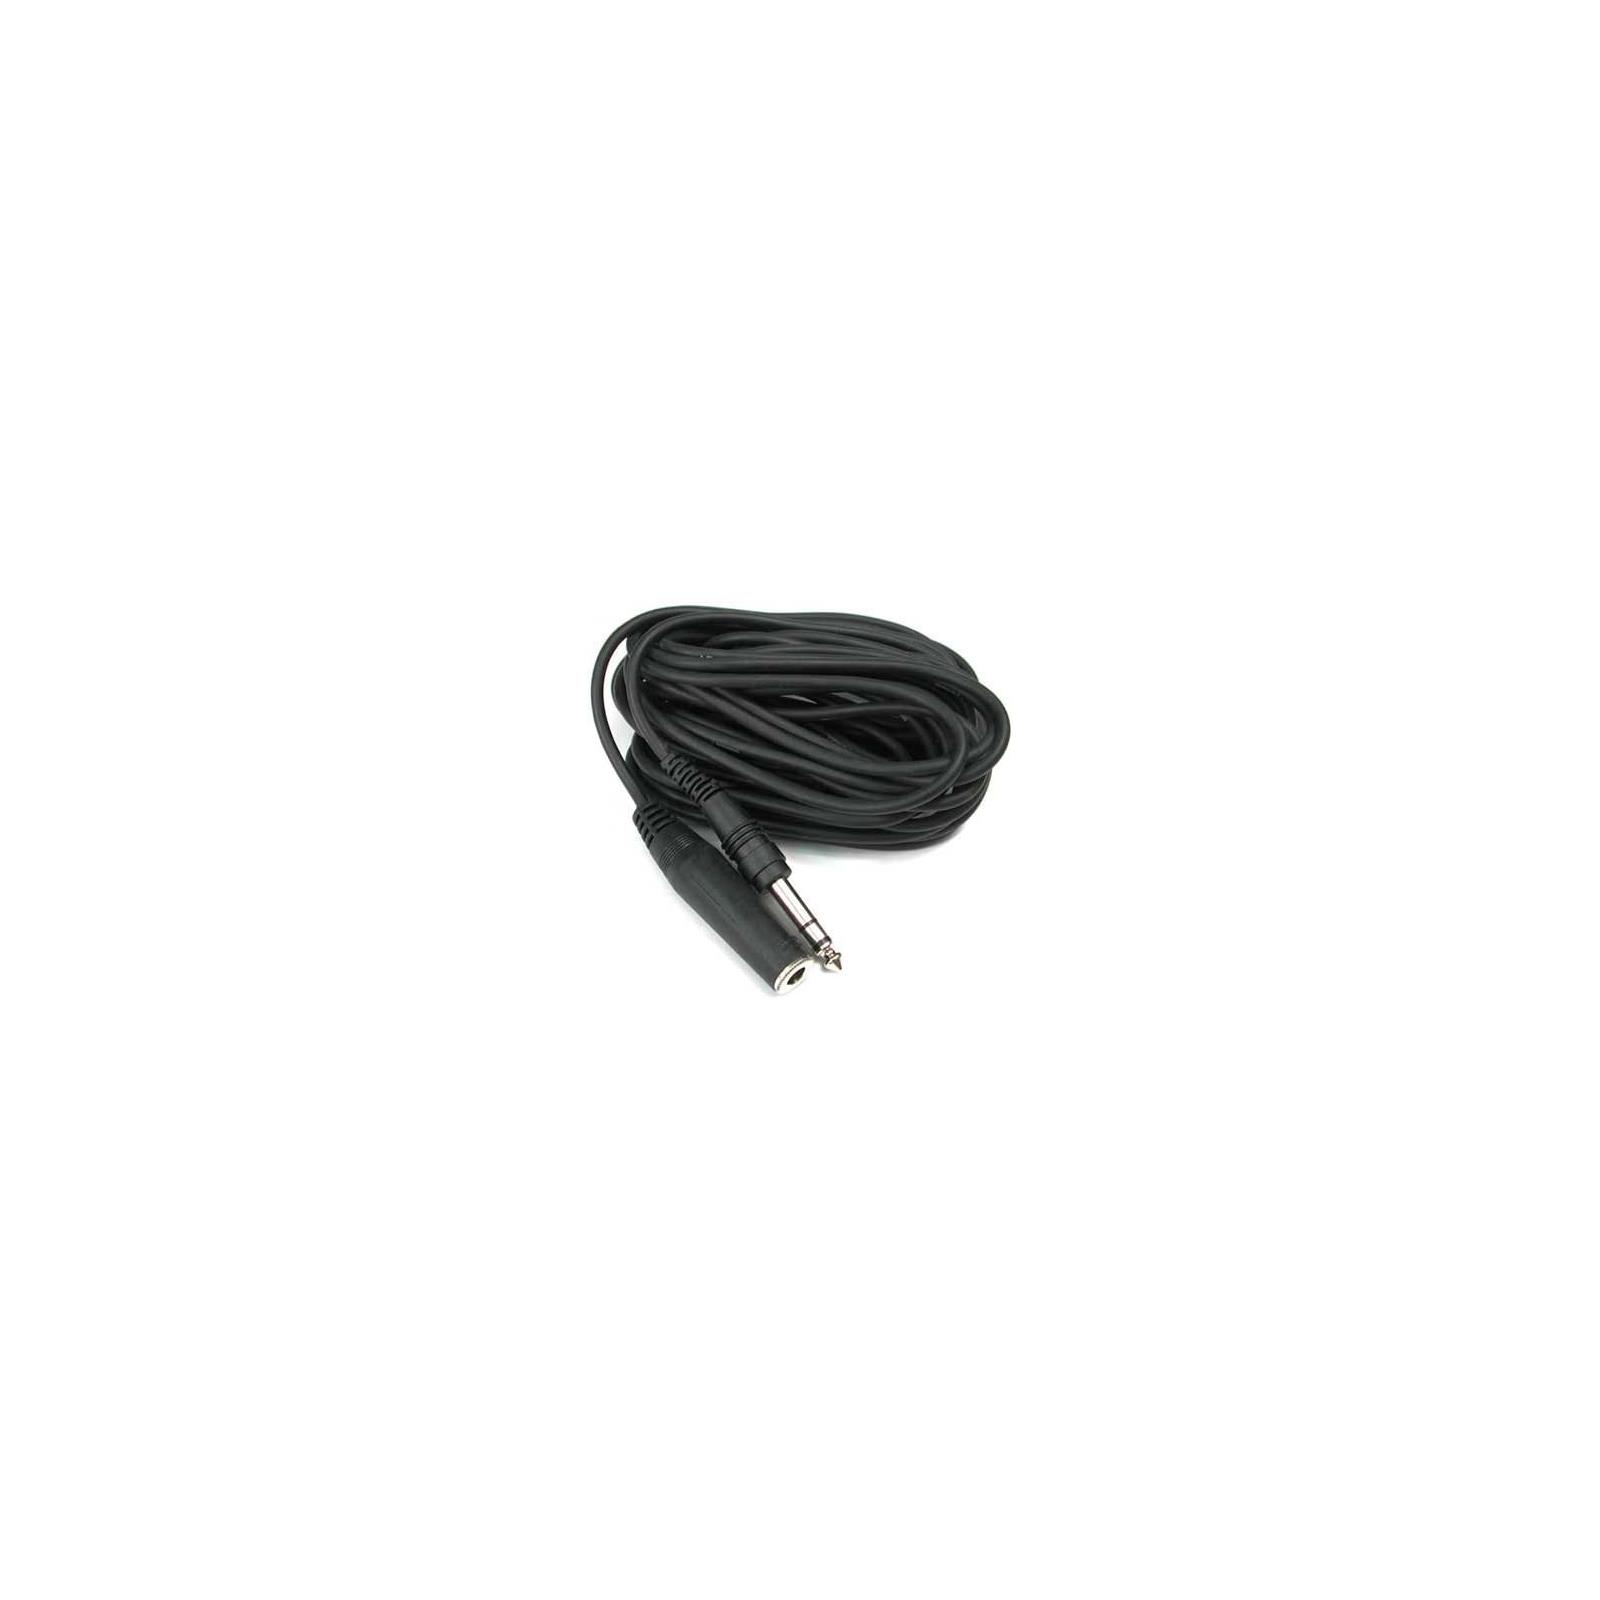 Hosa 25' Headphone Extension Cable